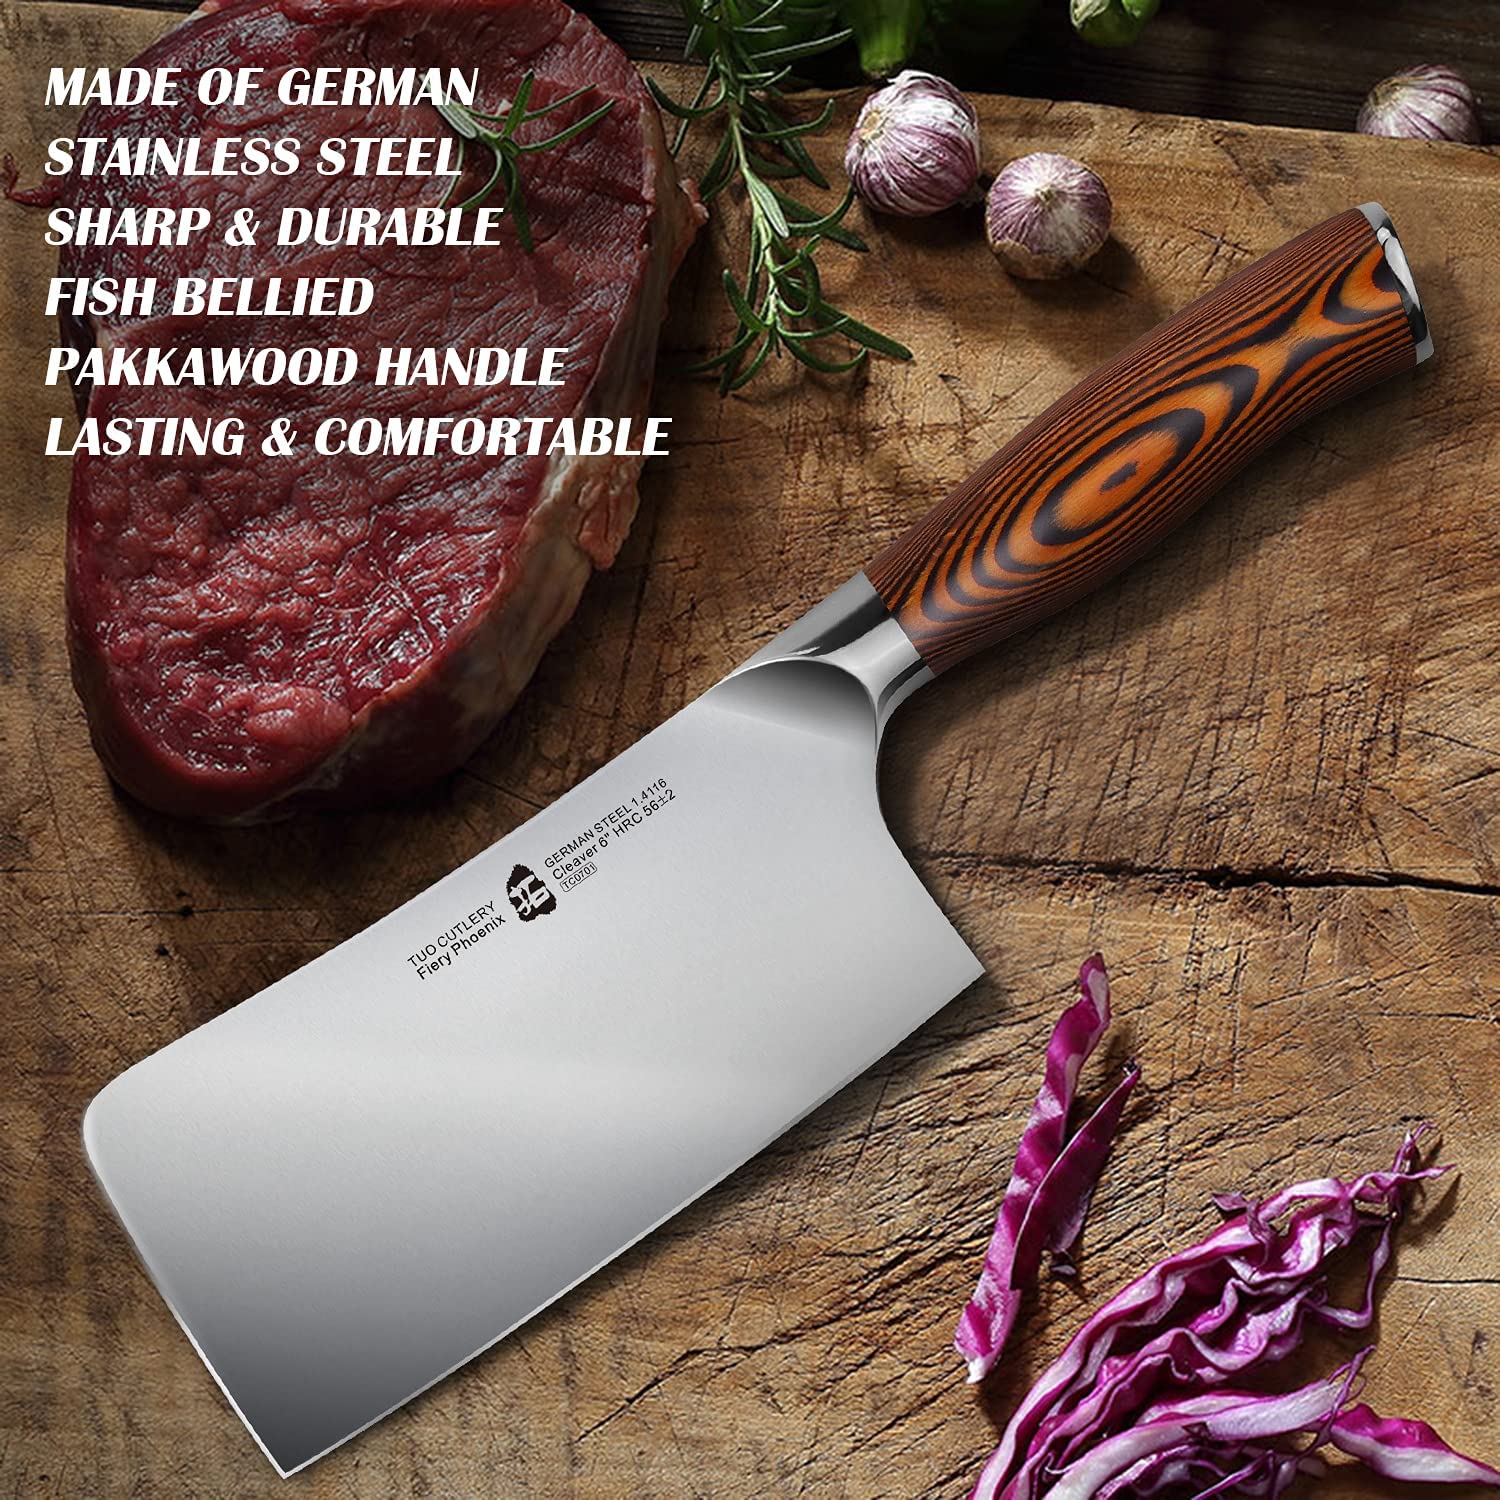 Product Review: Chinese Chef Knives-TUO Cutlery Fiery Phoenix Series 